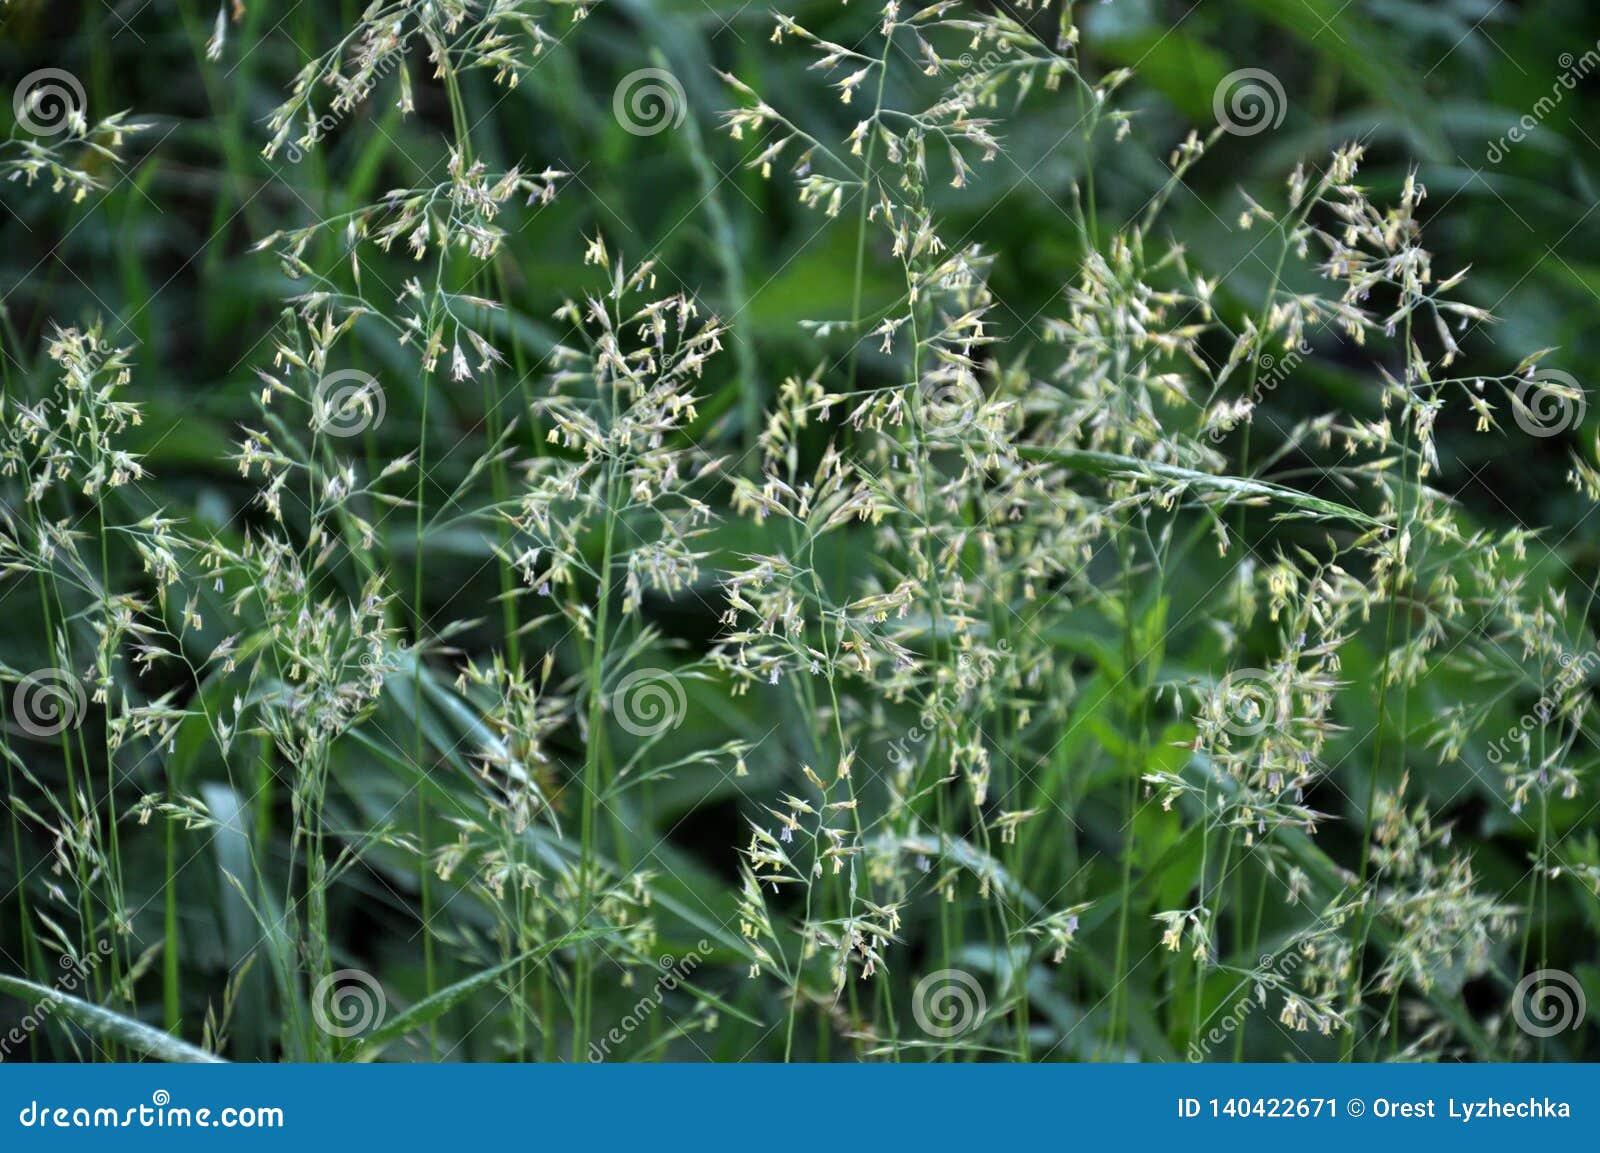 in nature, forage grass is growing for animals bluegrass poa trivialis